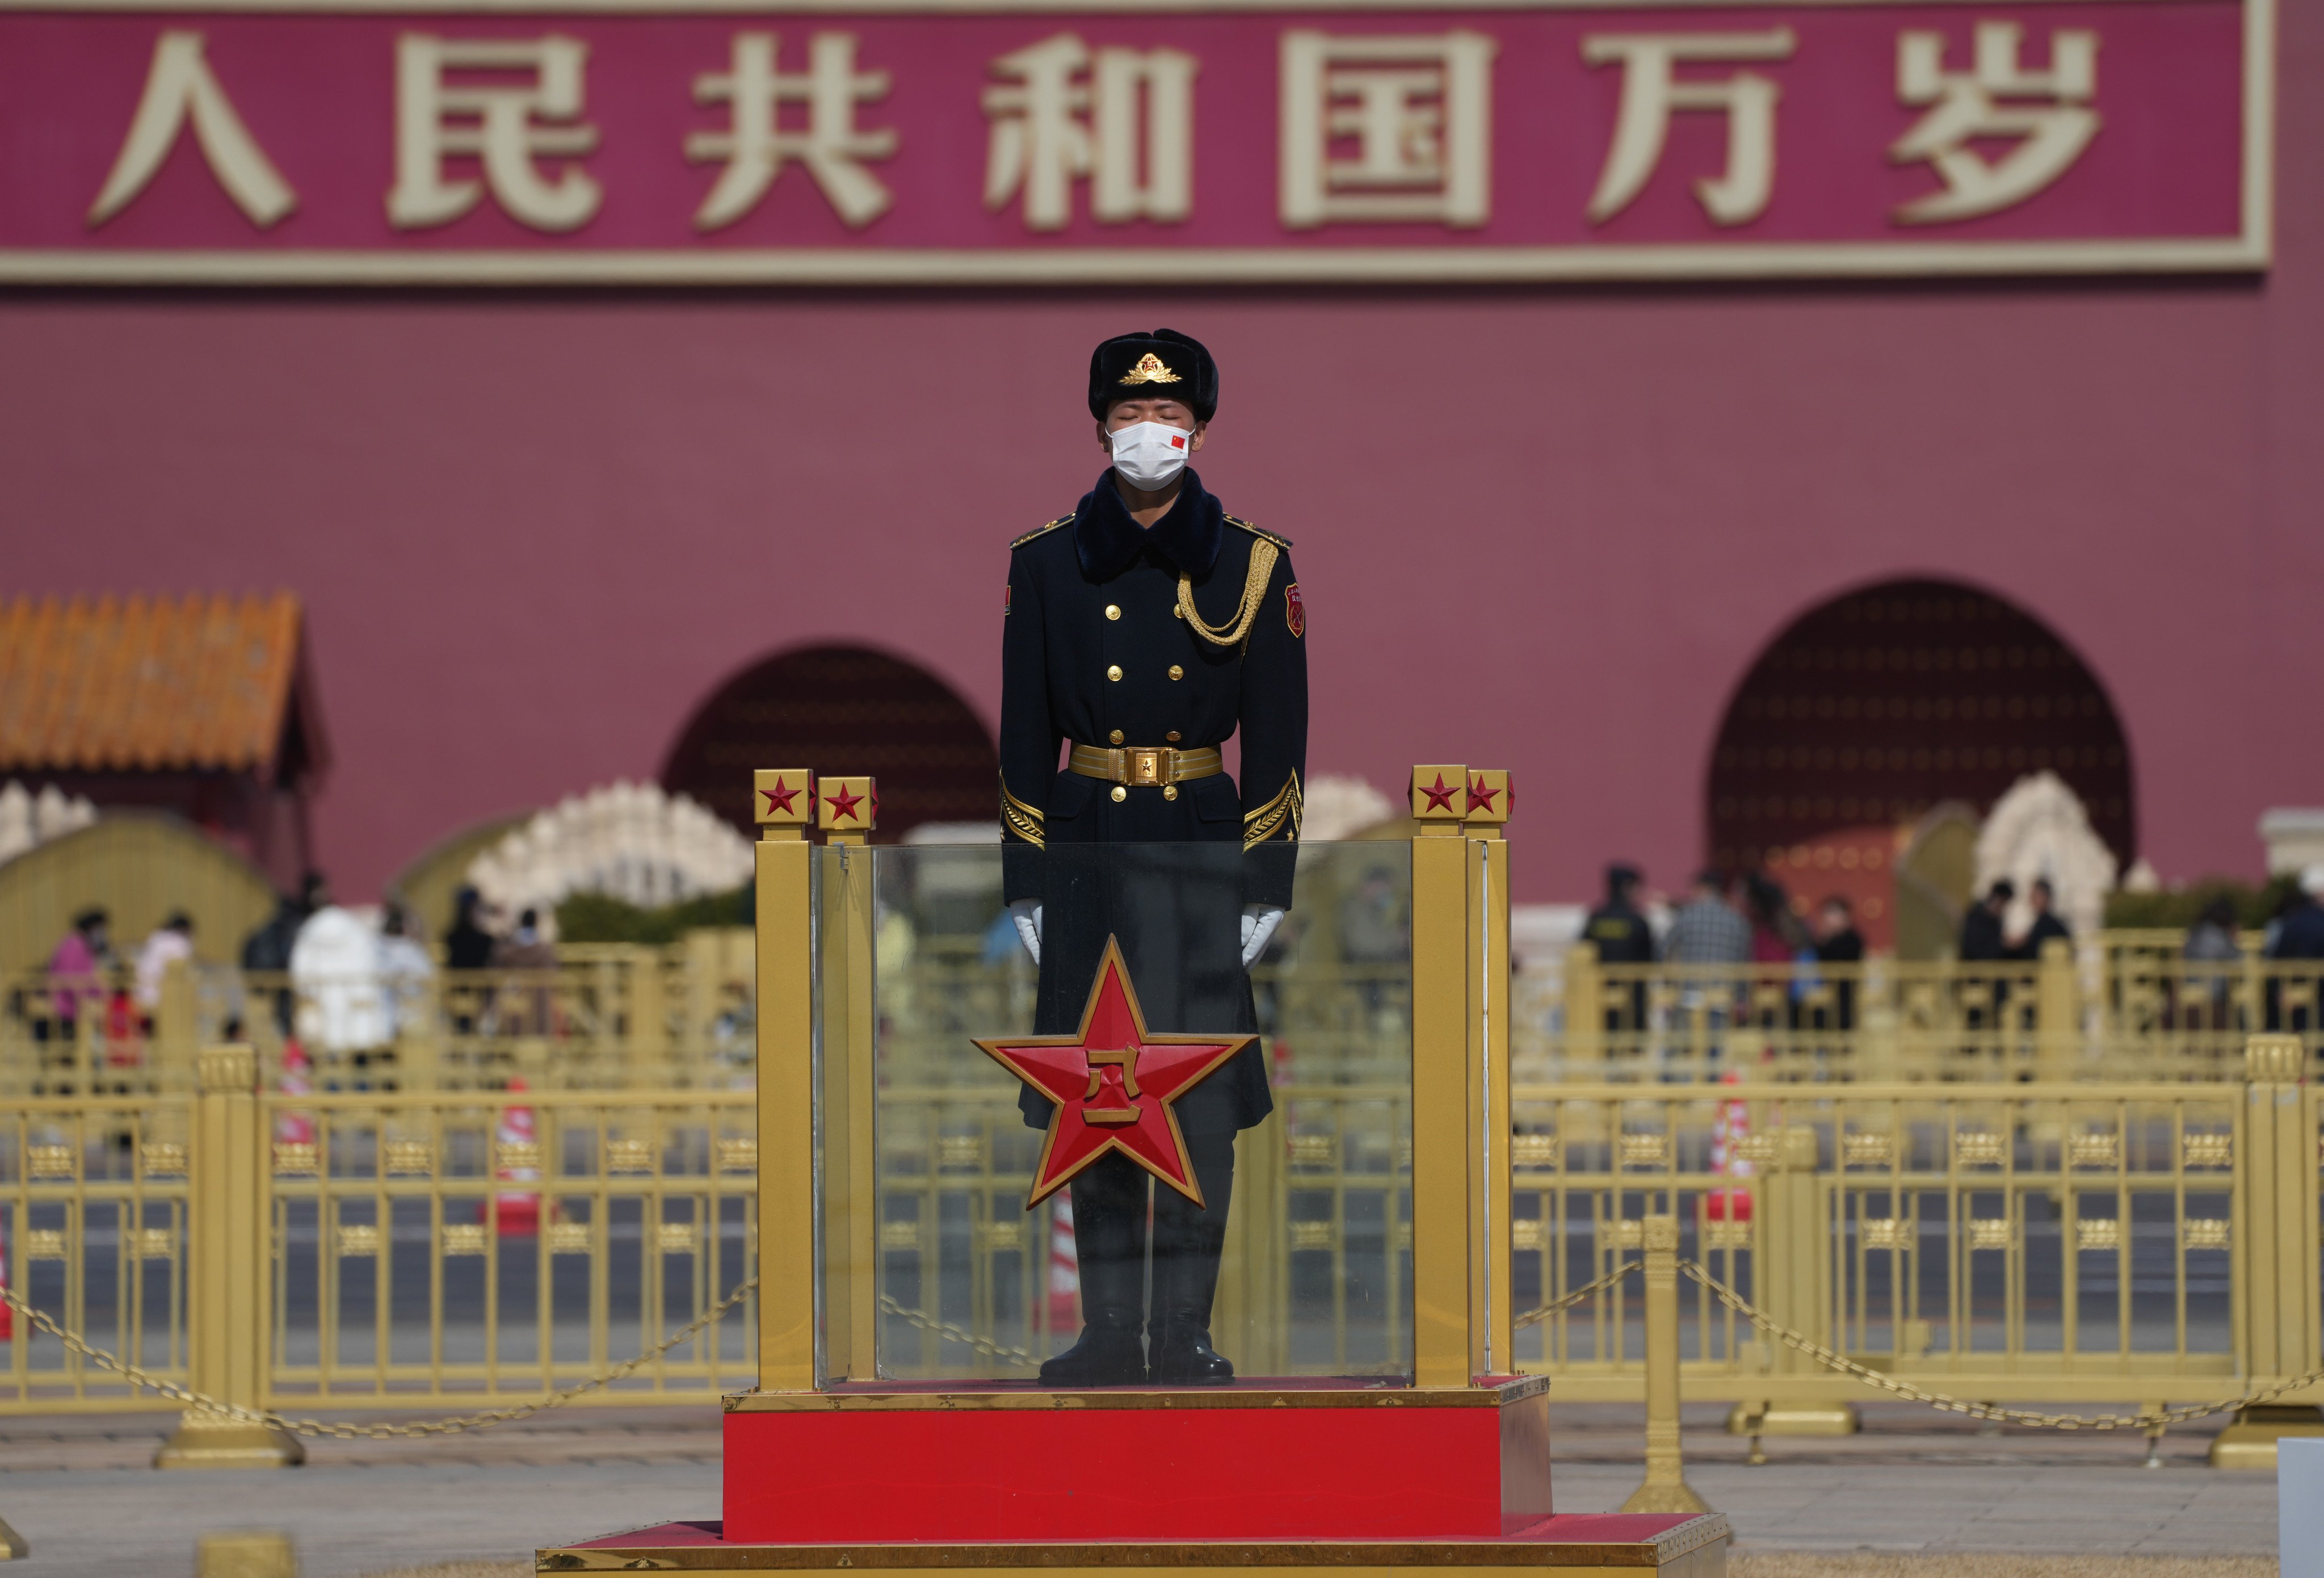 China is seeking a bigger role in global governance and security. Photo: Robert Ng